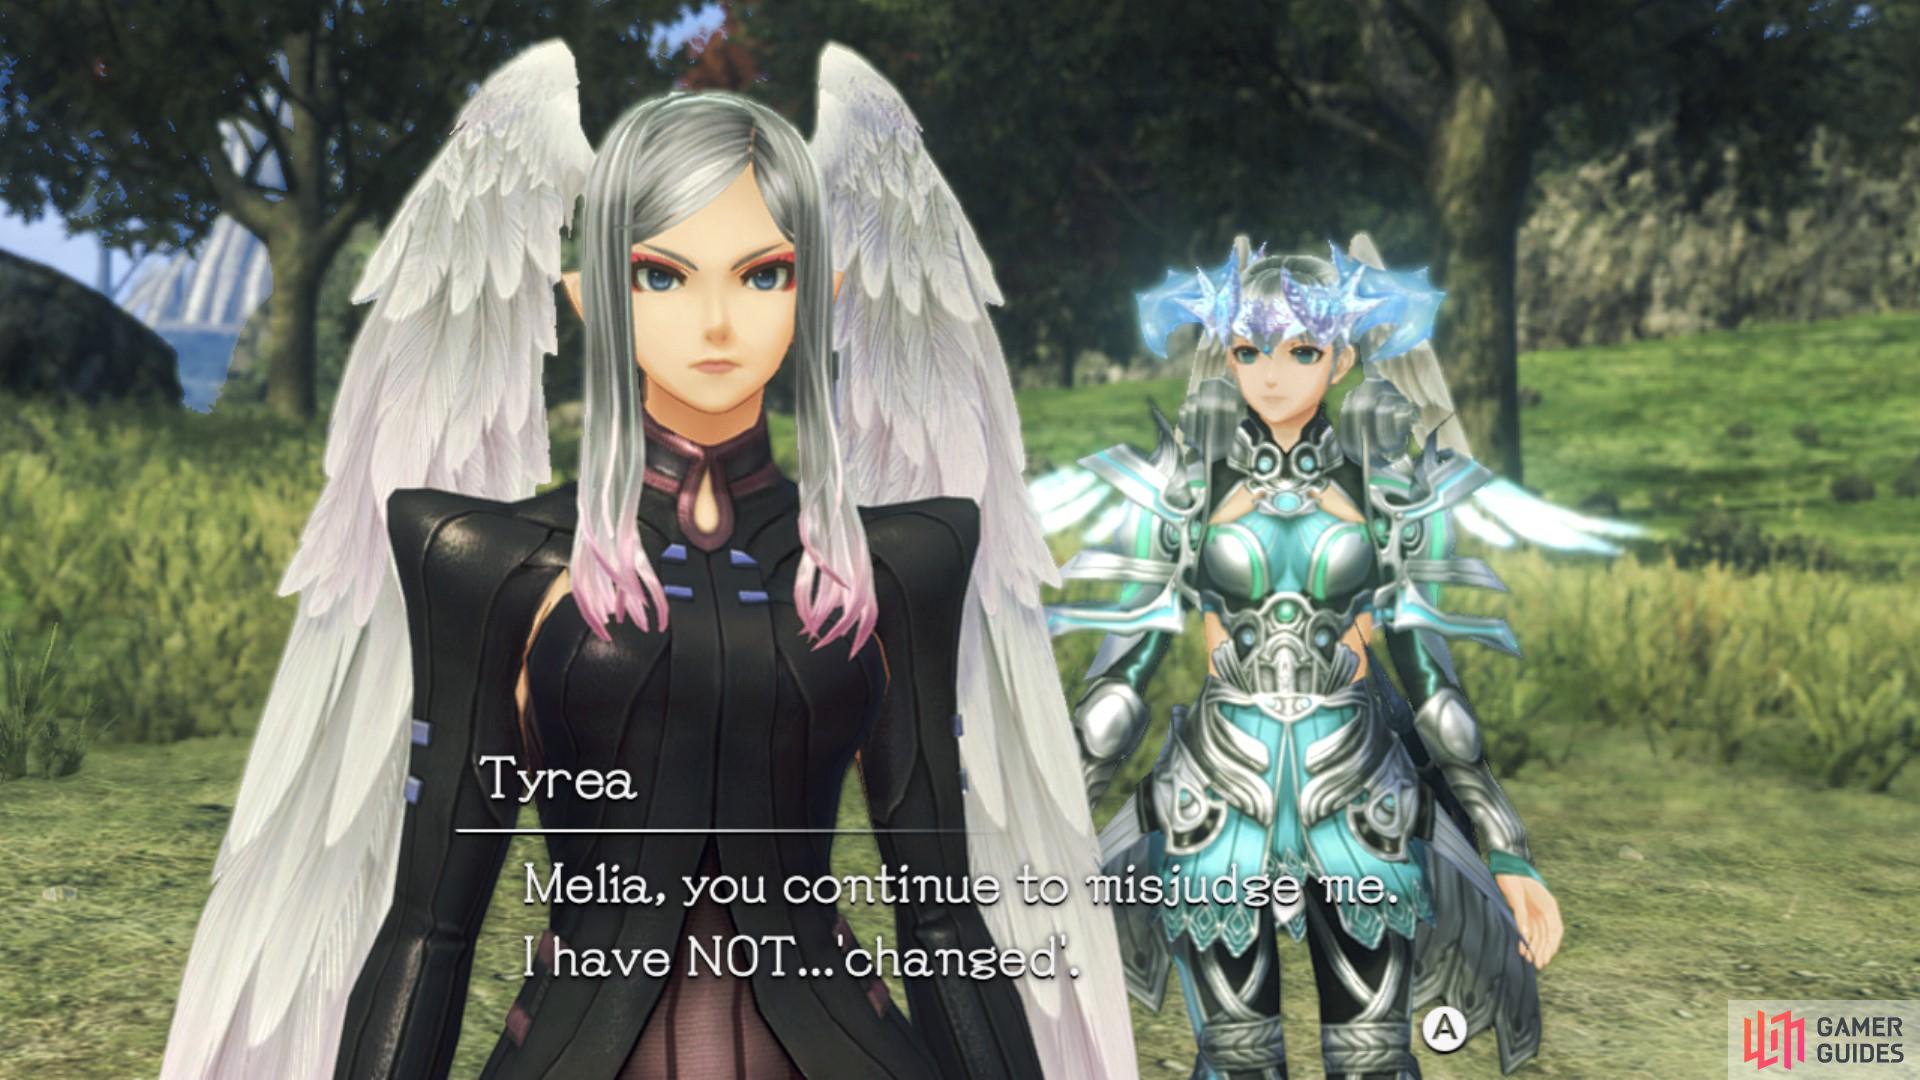 Tyrea is still a little confrontational with Melia. 